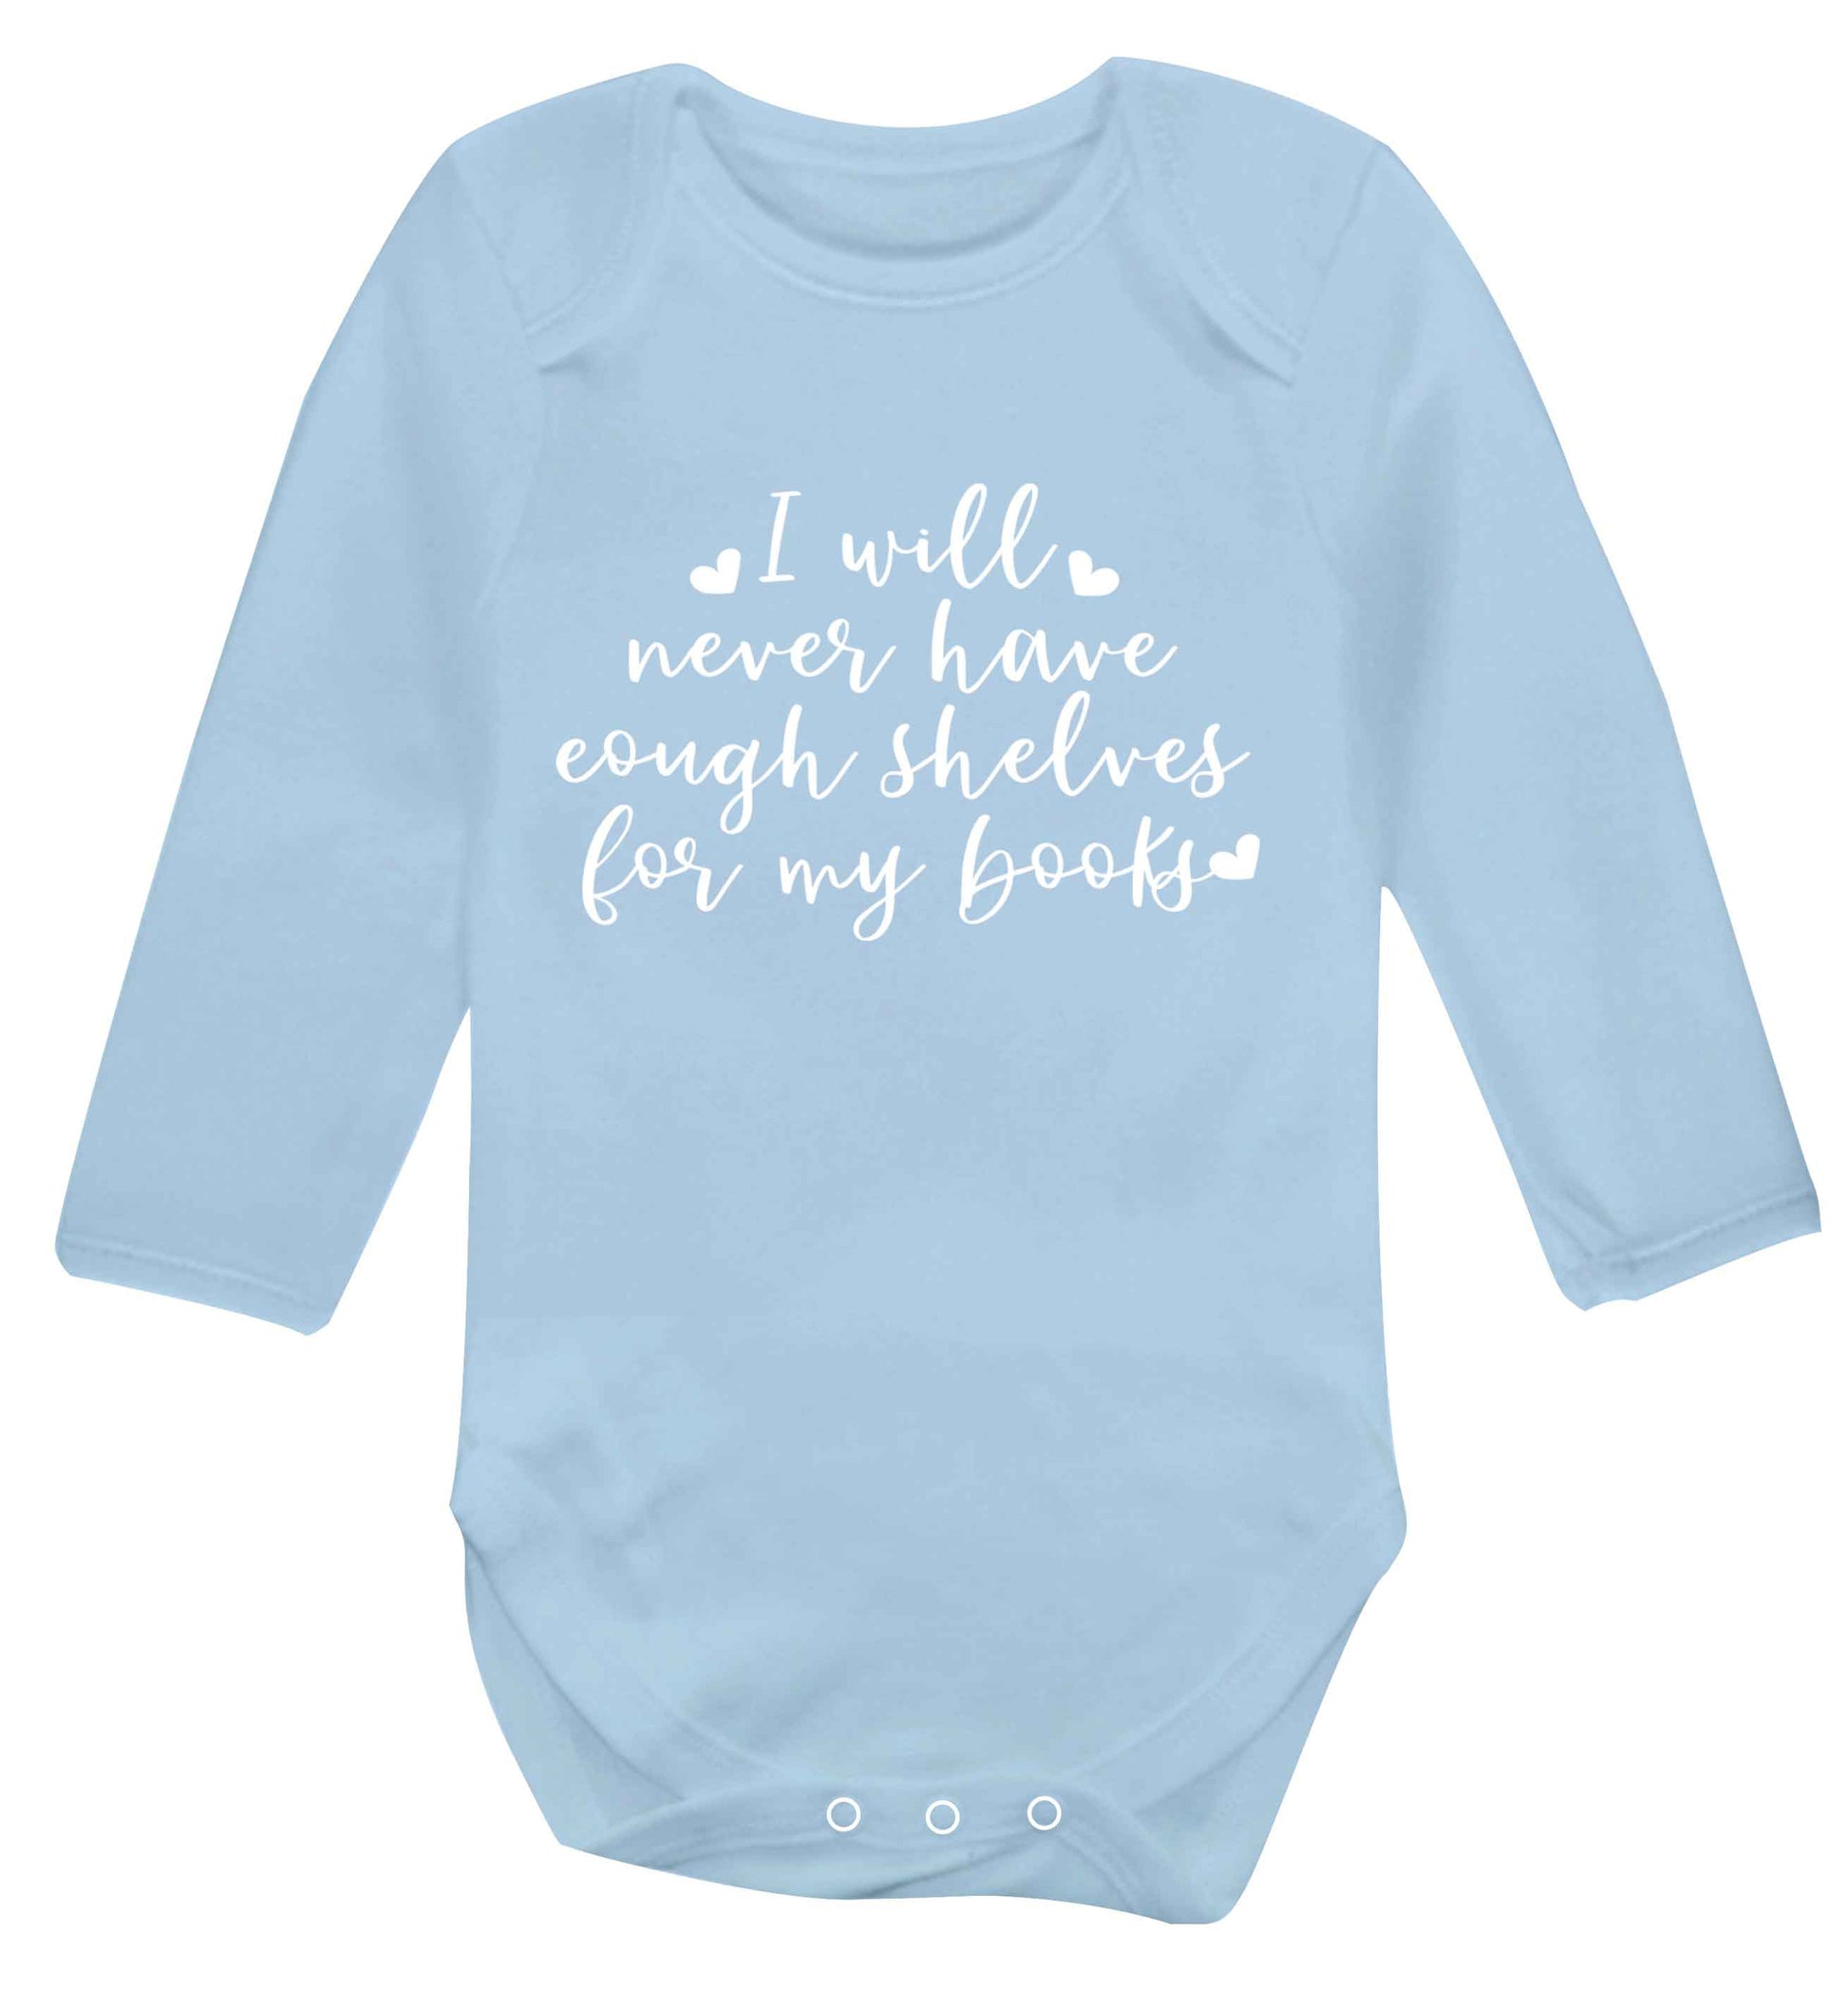 I will never have enough shelves for my books Baby Vest long sleeved pale blue 6-12 months